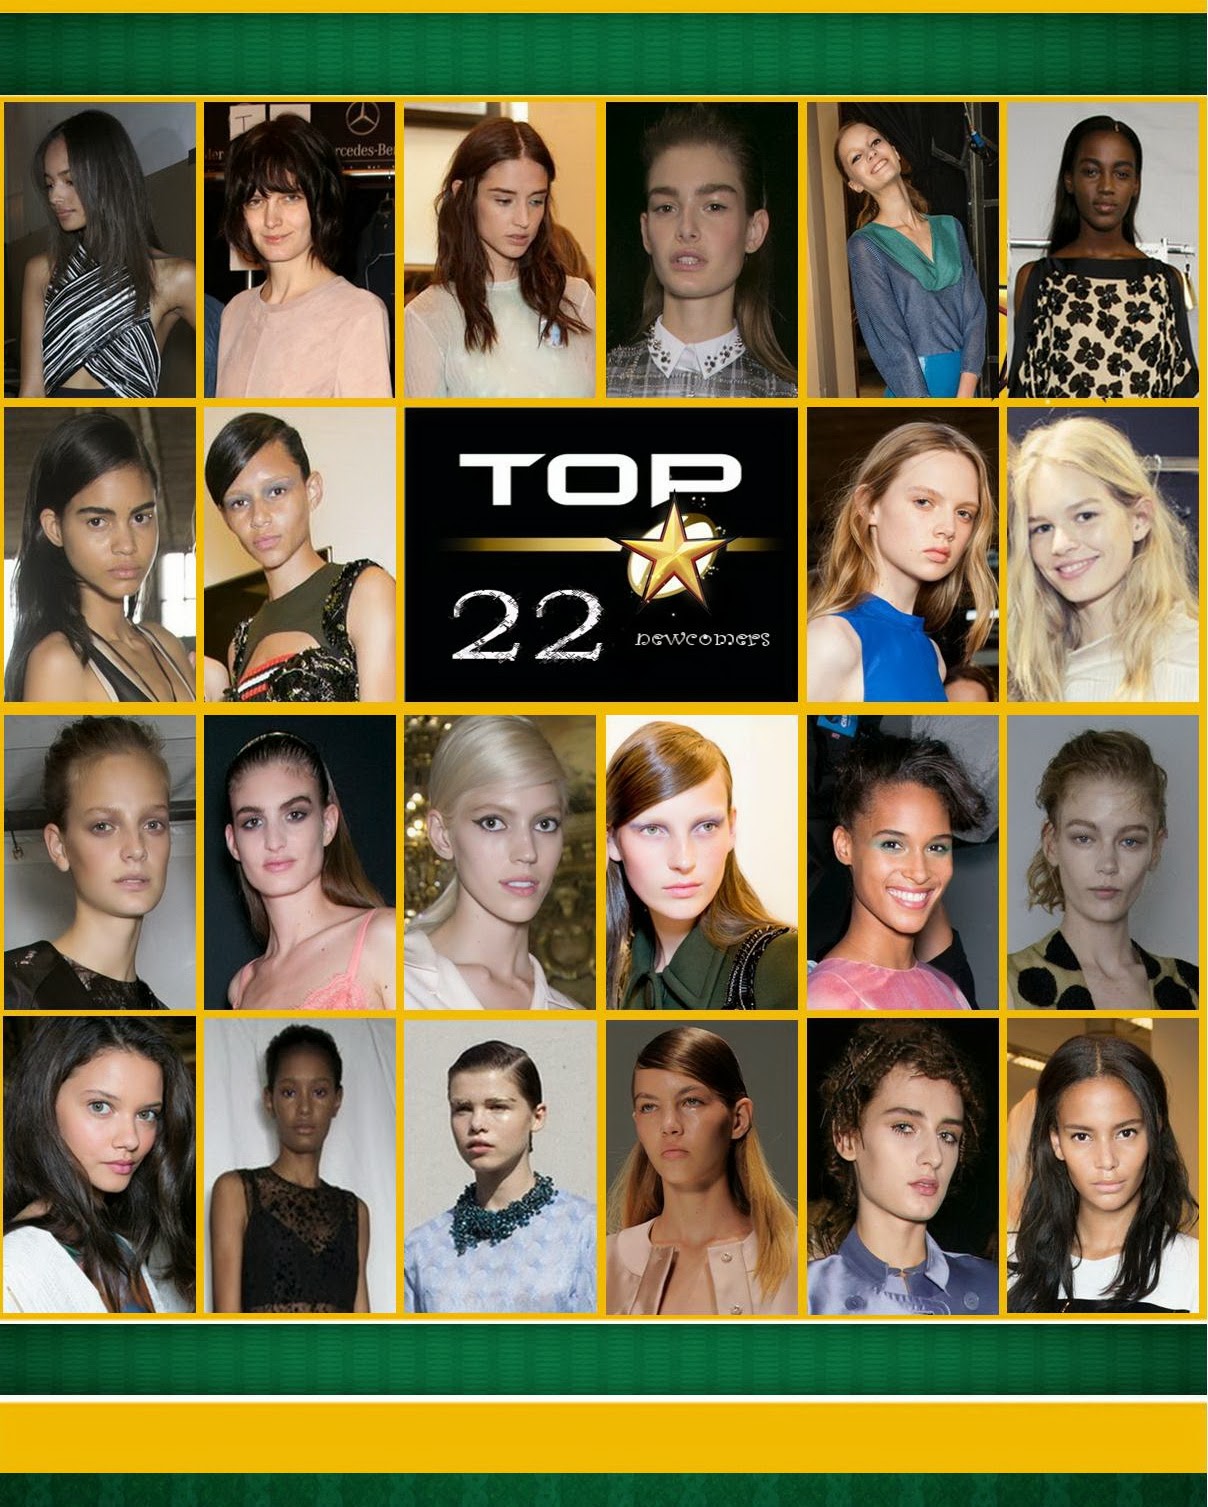 Top 22 Newcomers S/S 2014